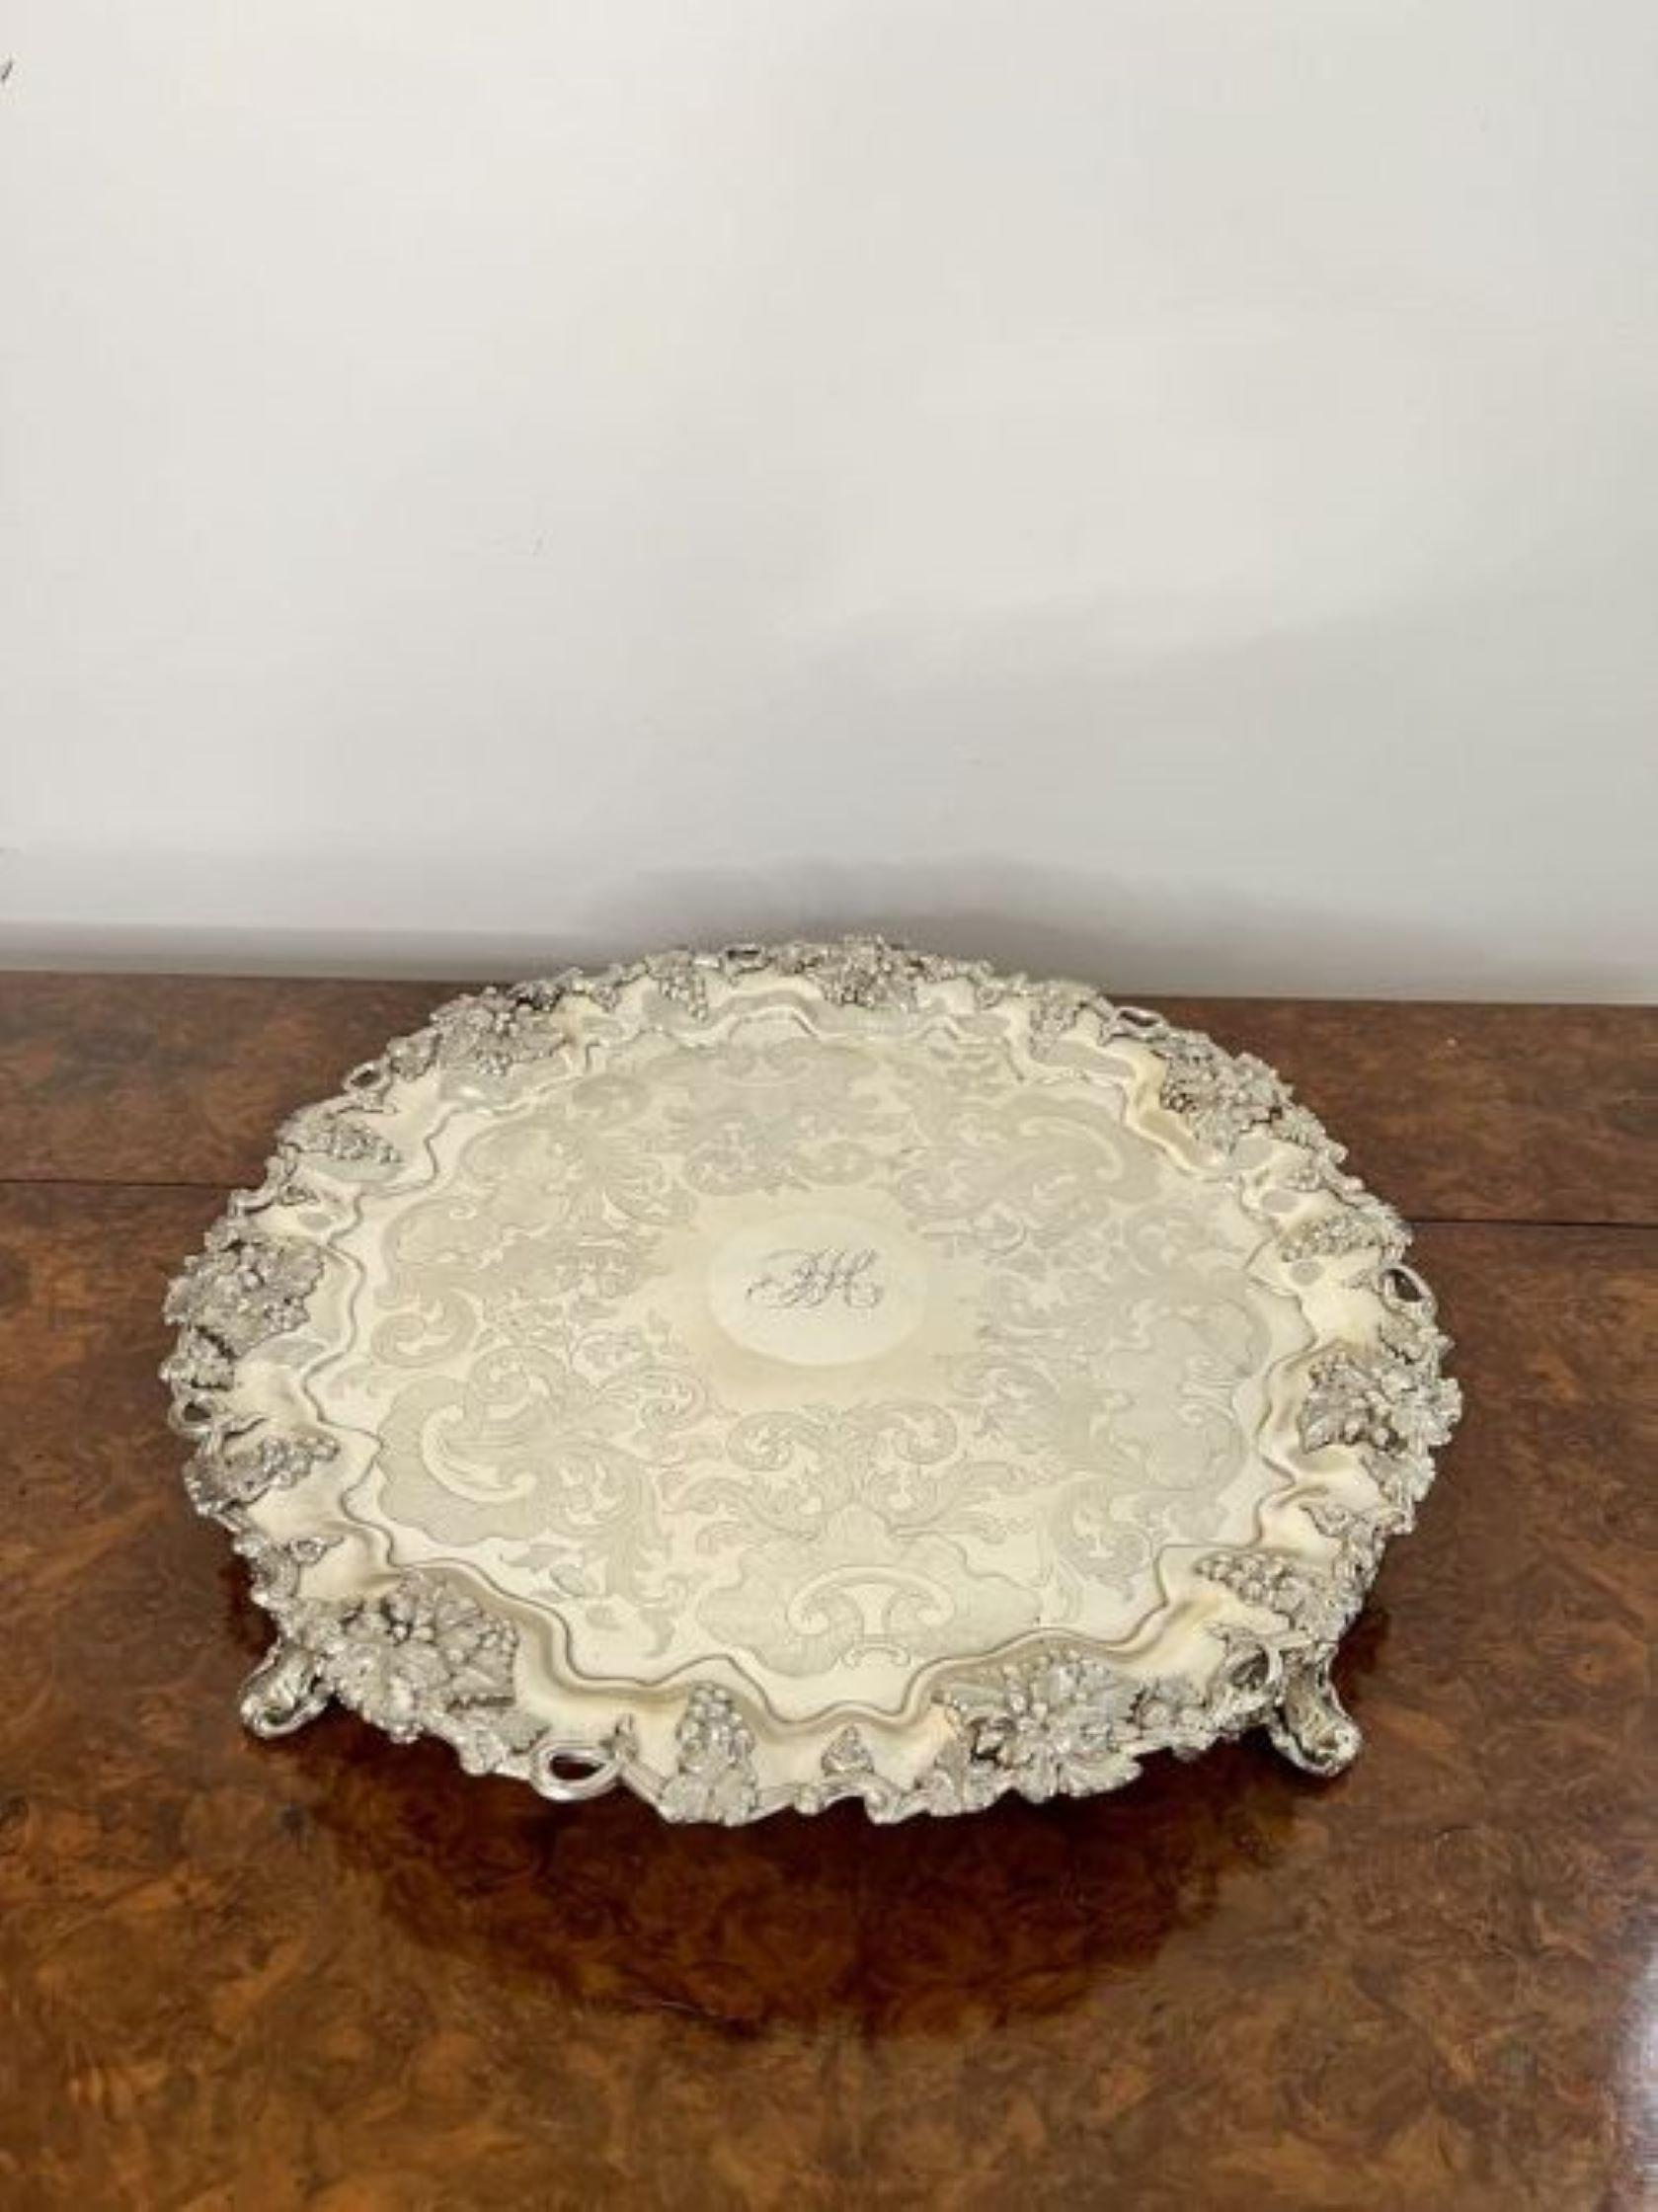 Pair of antique Edwardian engraved silver plated trays having a quality pair of antique Edwardian silver plated trays both with an engraved centre and a fantastic ornate boarder raised on three shaped feet. 
Large tray H 5cm W 37cm D37cm
Small tray